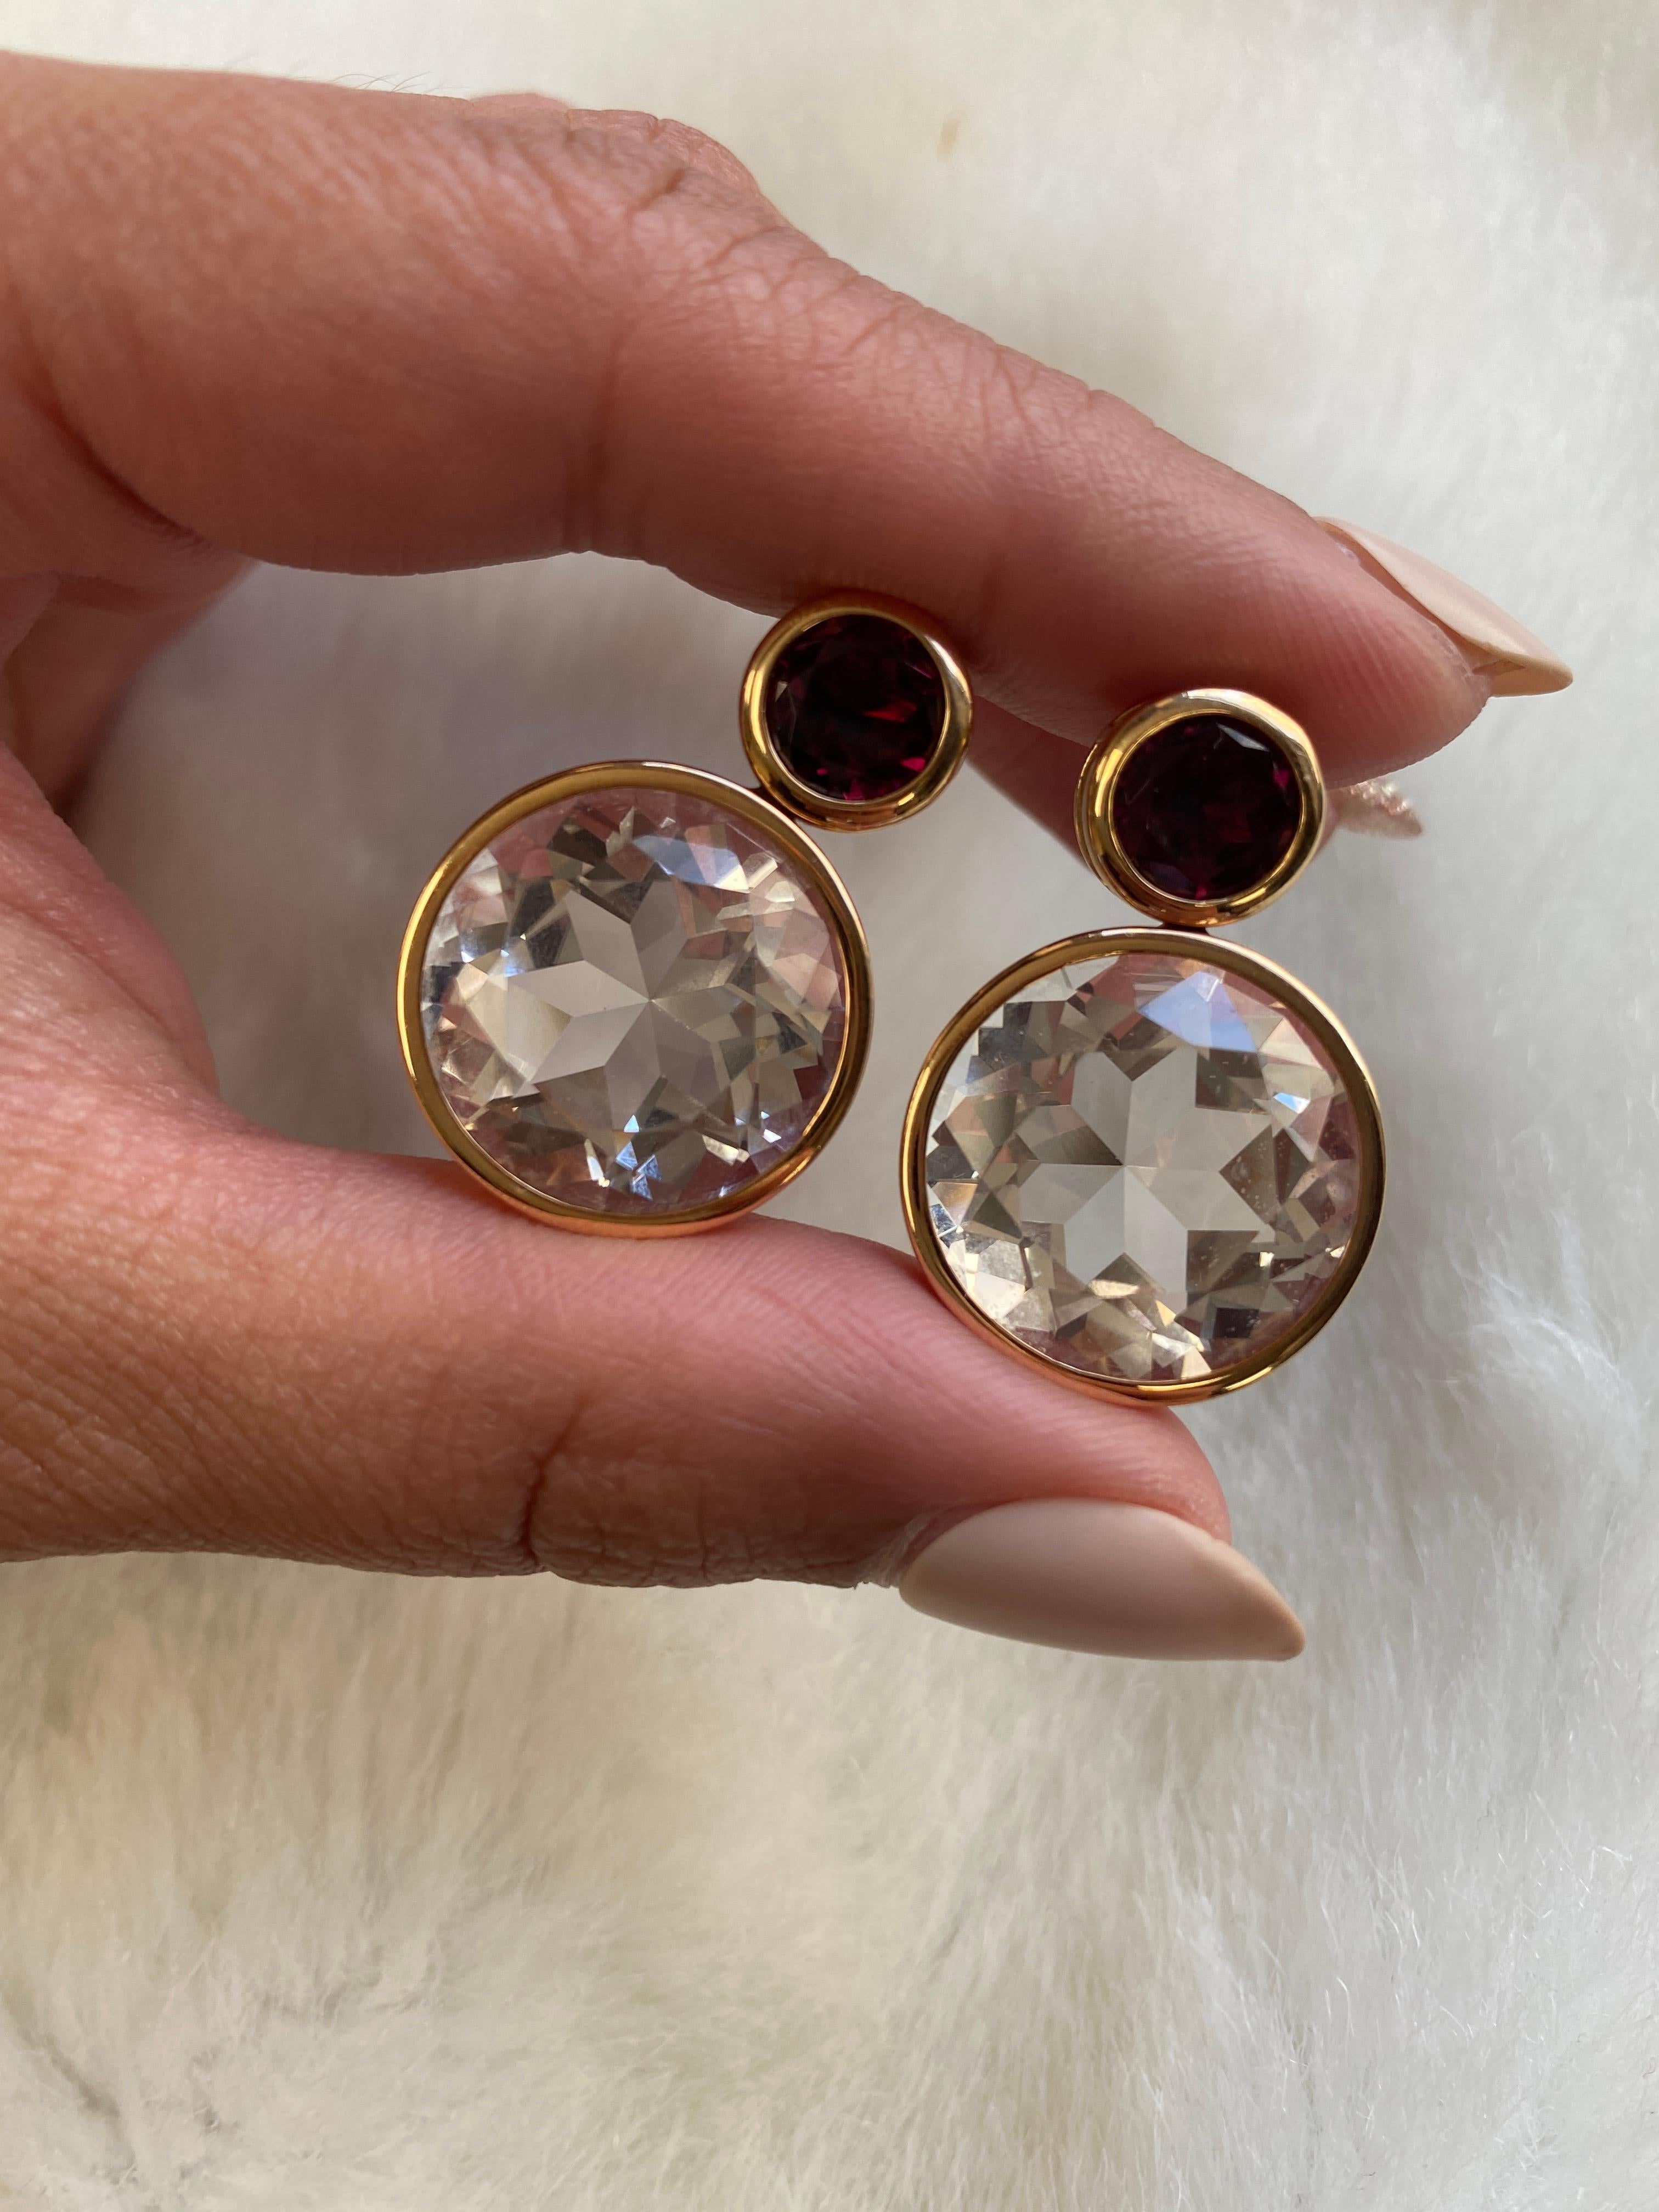 These Faceted Rock Crystal & Garnet Earrings from the 'Gossip' Collection are a stunning pair of earrings made from 18K rose gold. The earrings feature faceted rock crystal stones that shimmer in the light, along with garnet gemstones that add a